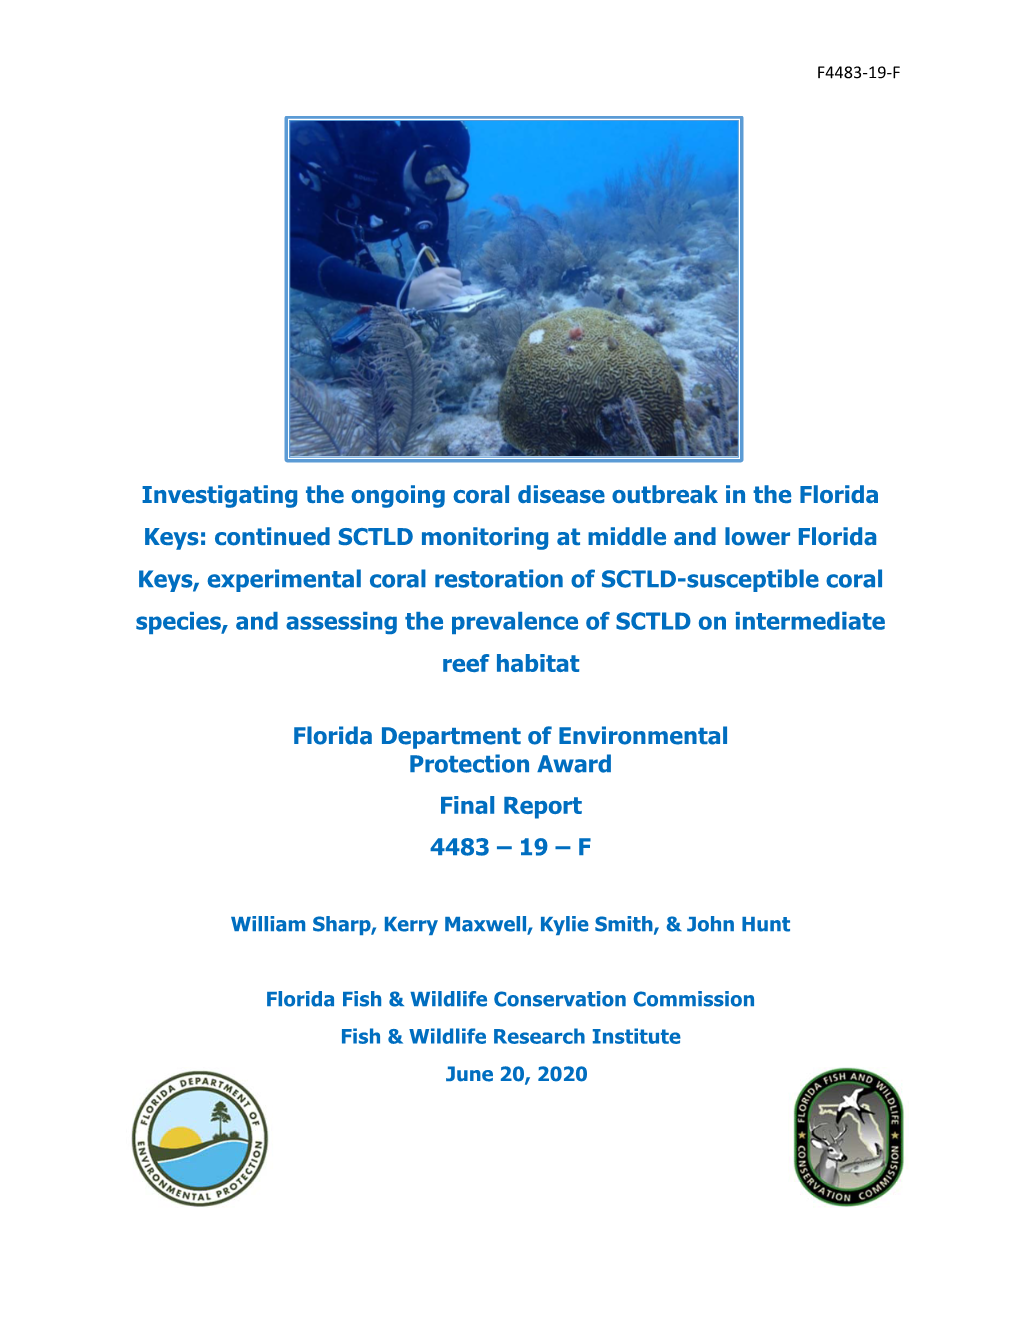 Investigating the Ongoing Coral Disease Outbreak in the Florida Keys